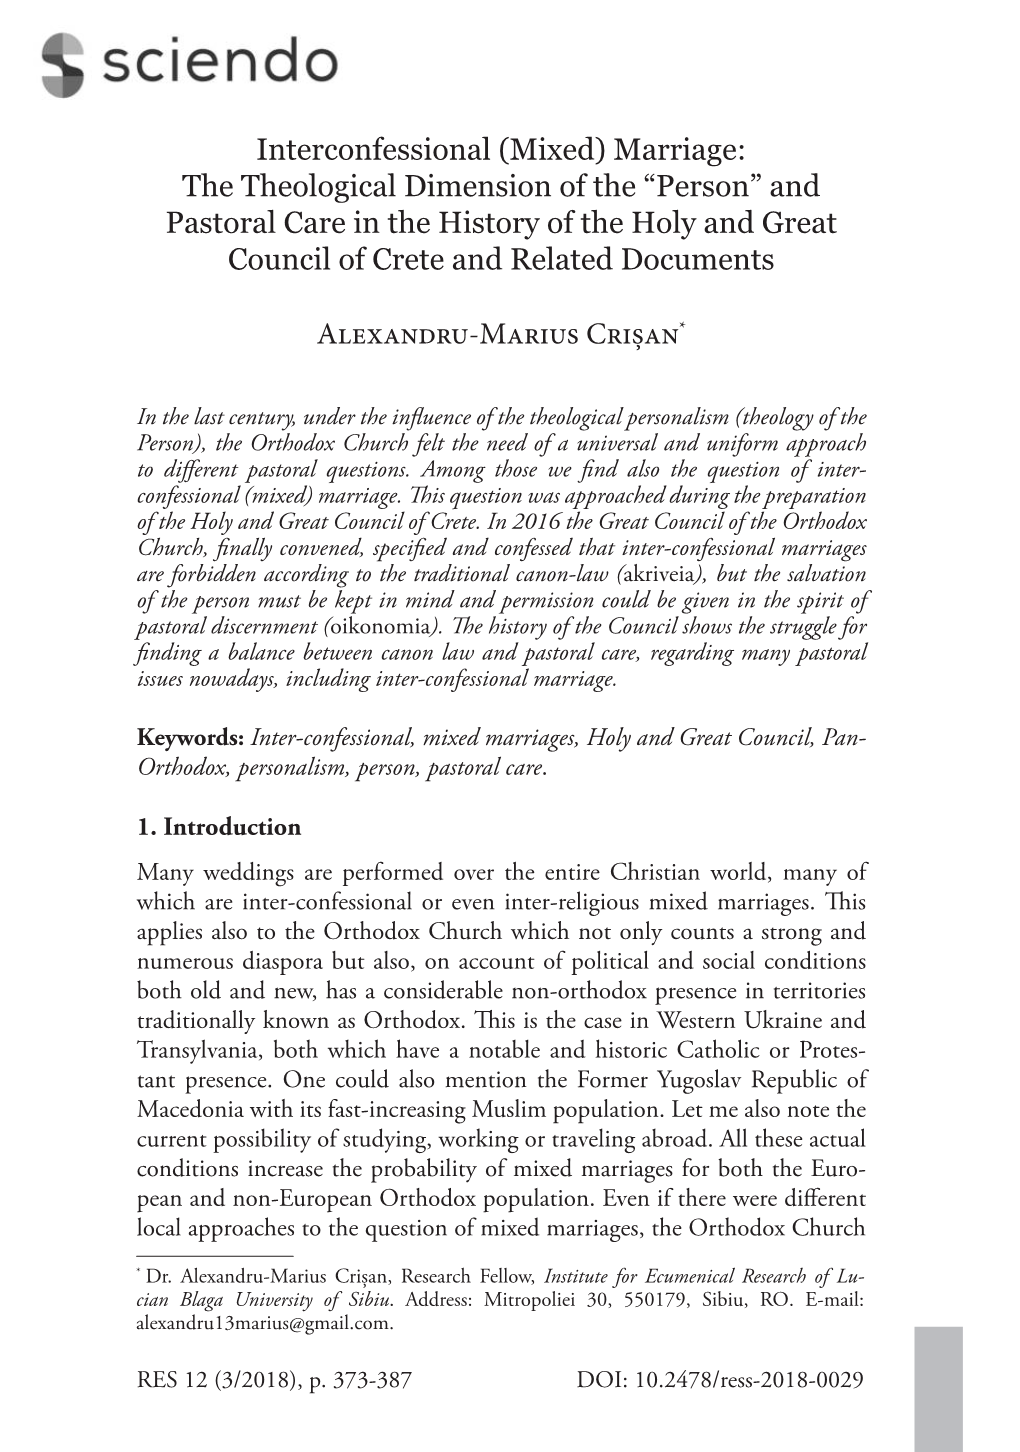 Marriage: the Theological Dimension of the “Person” and Pastoral Care in the History of the Holy and Great Council of Crete and Related Documents